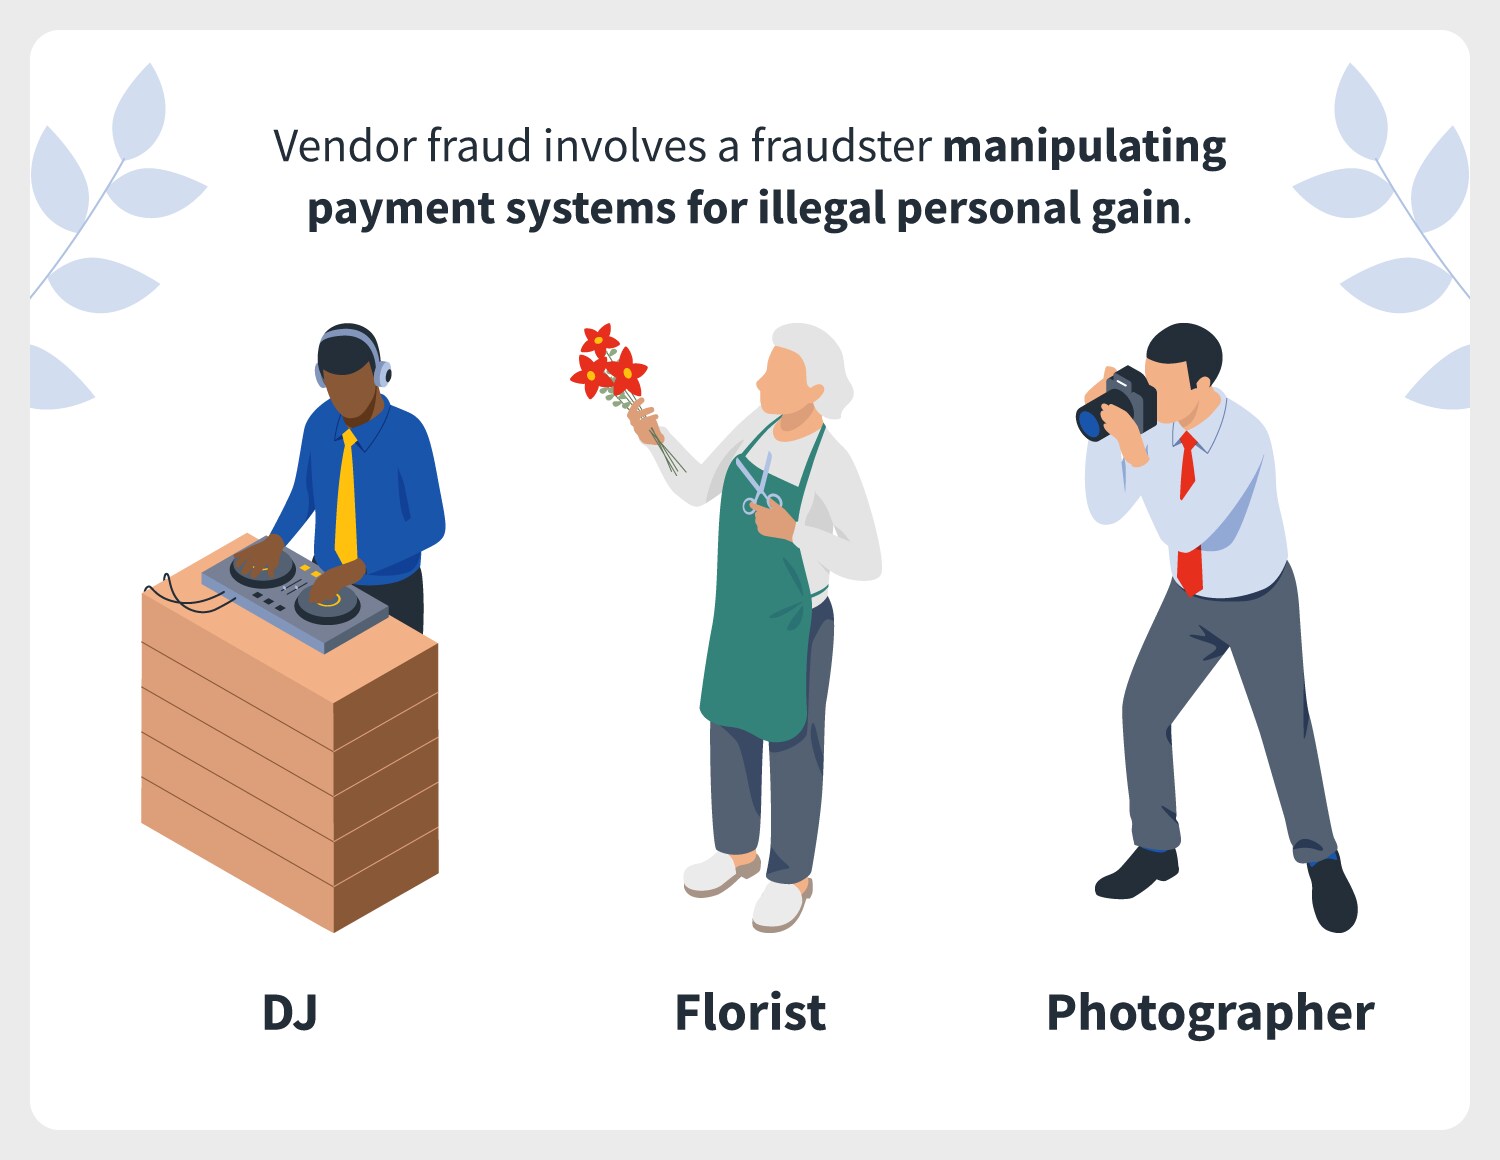 A black person DJing music, an older florist woman creating bouquets and a white male taking photos indicating that these potential vendors could commit vendor fraud at a wedding